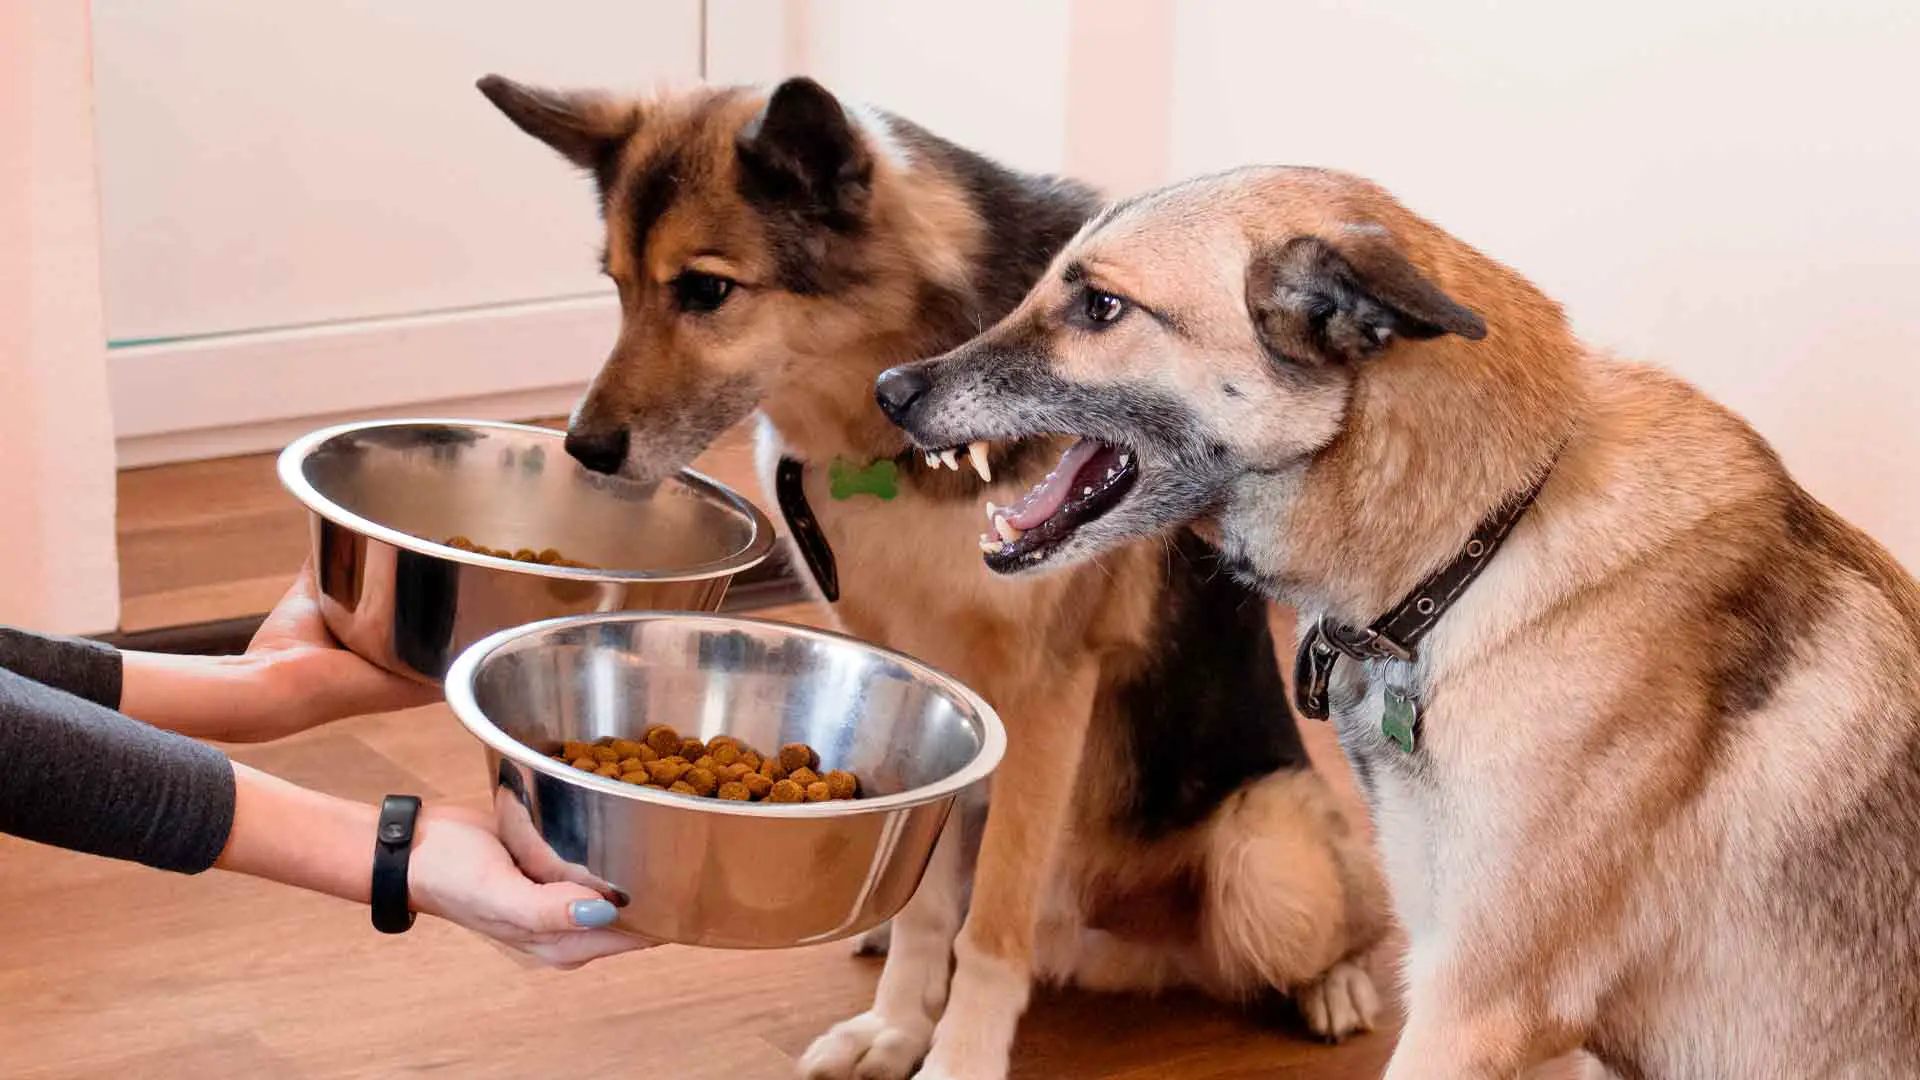 How To Stop Food Aggression In Dogs? [2021 Updated]